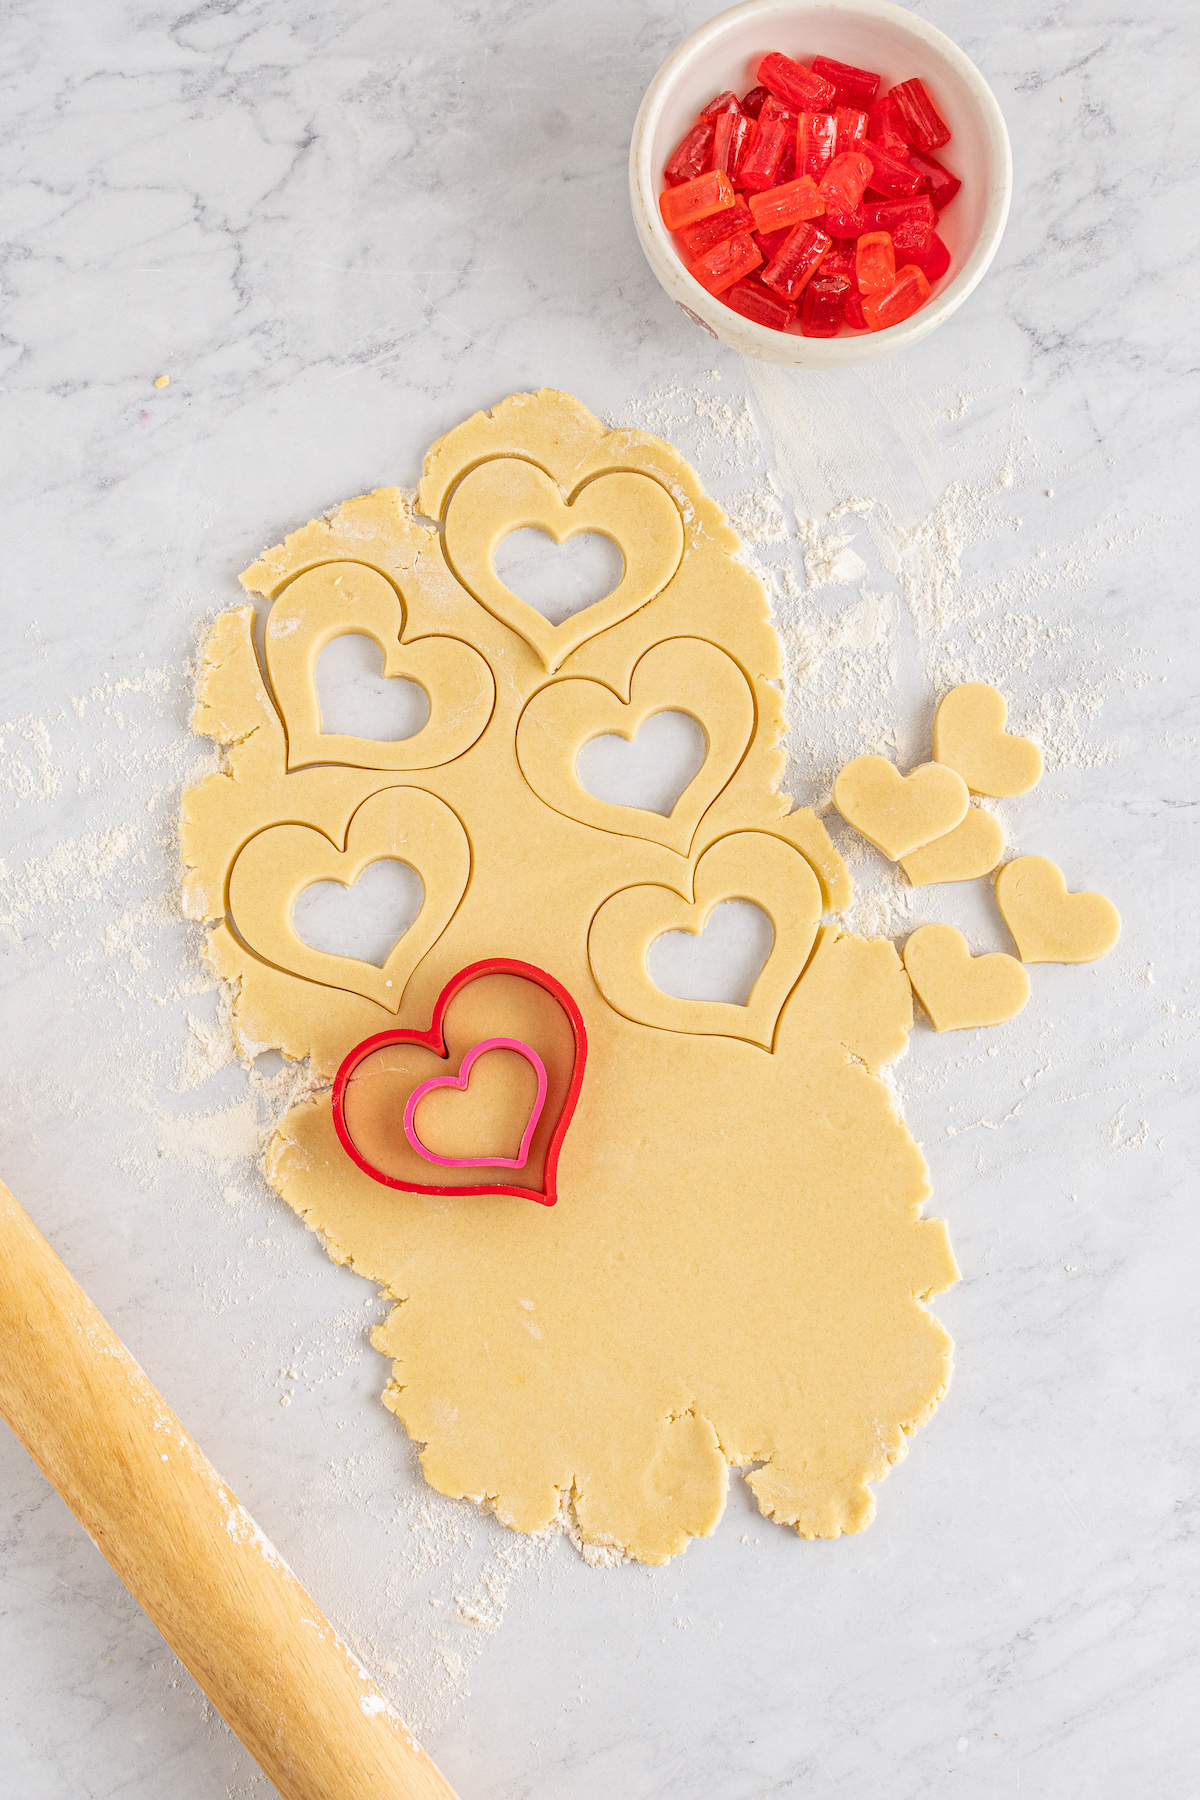 Cookie dough rolled out on a work surface, with heart-shaped cookies cut out of it.